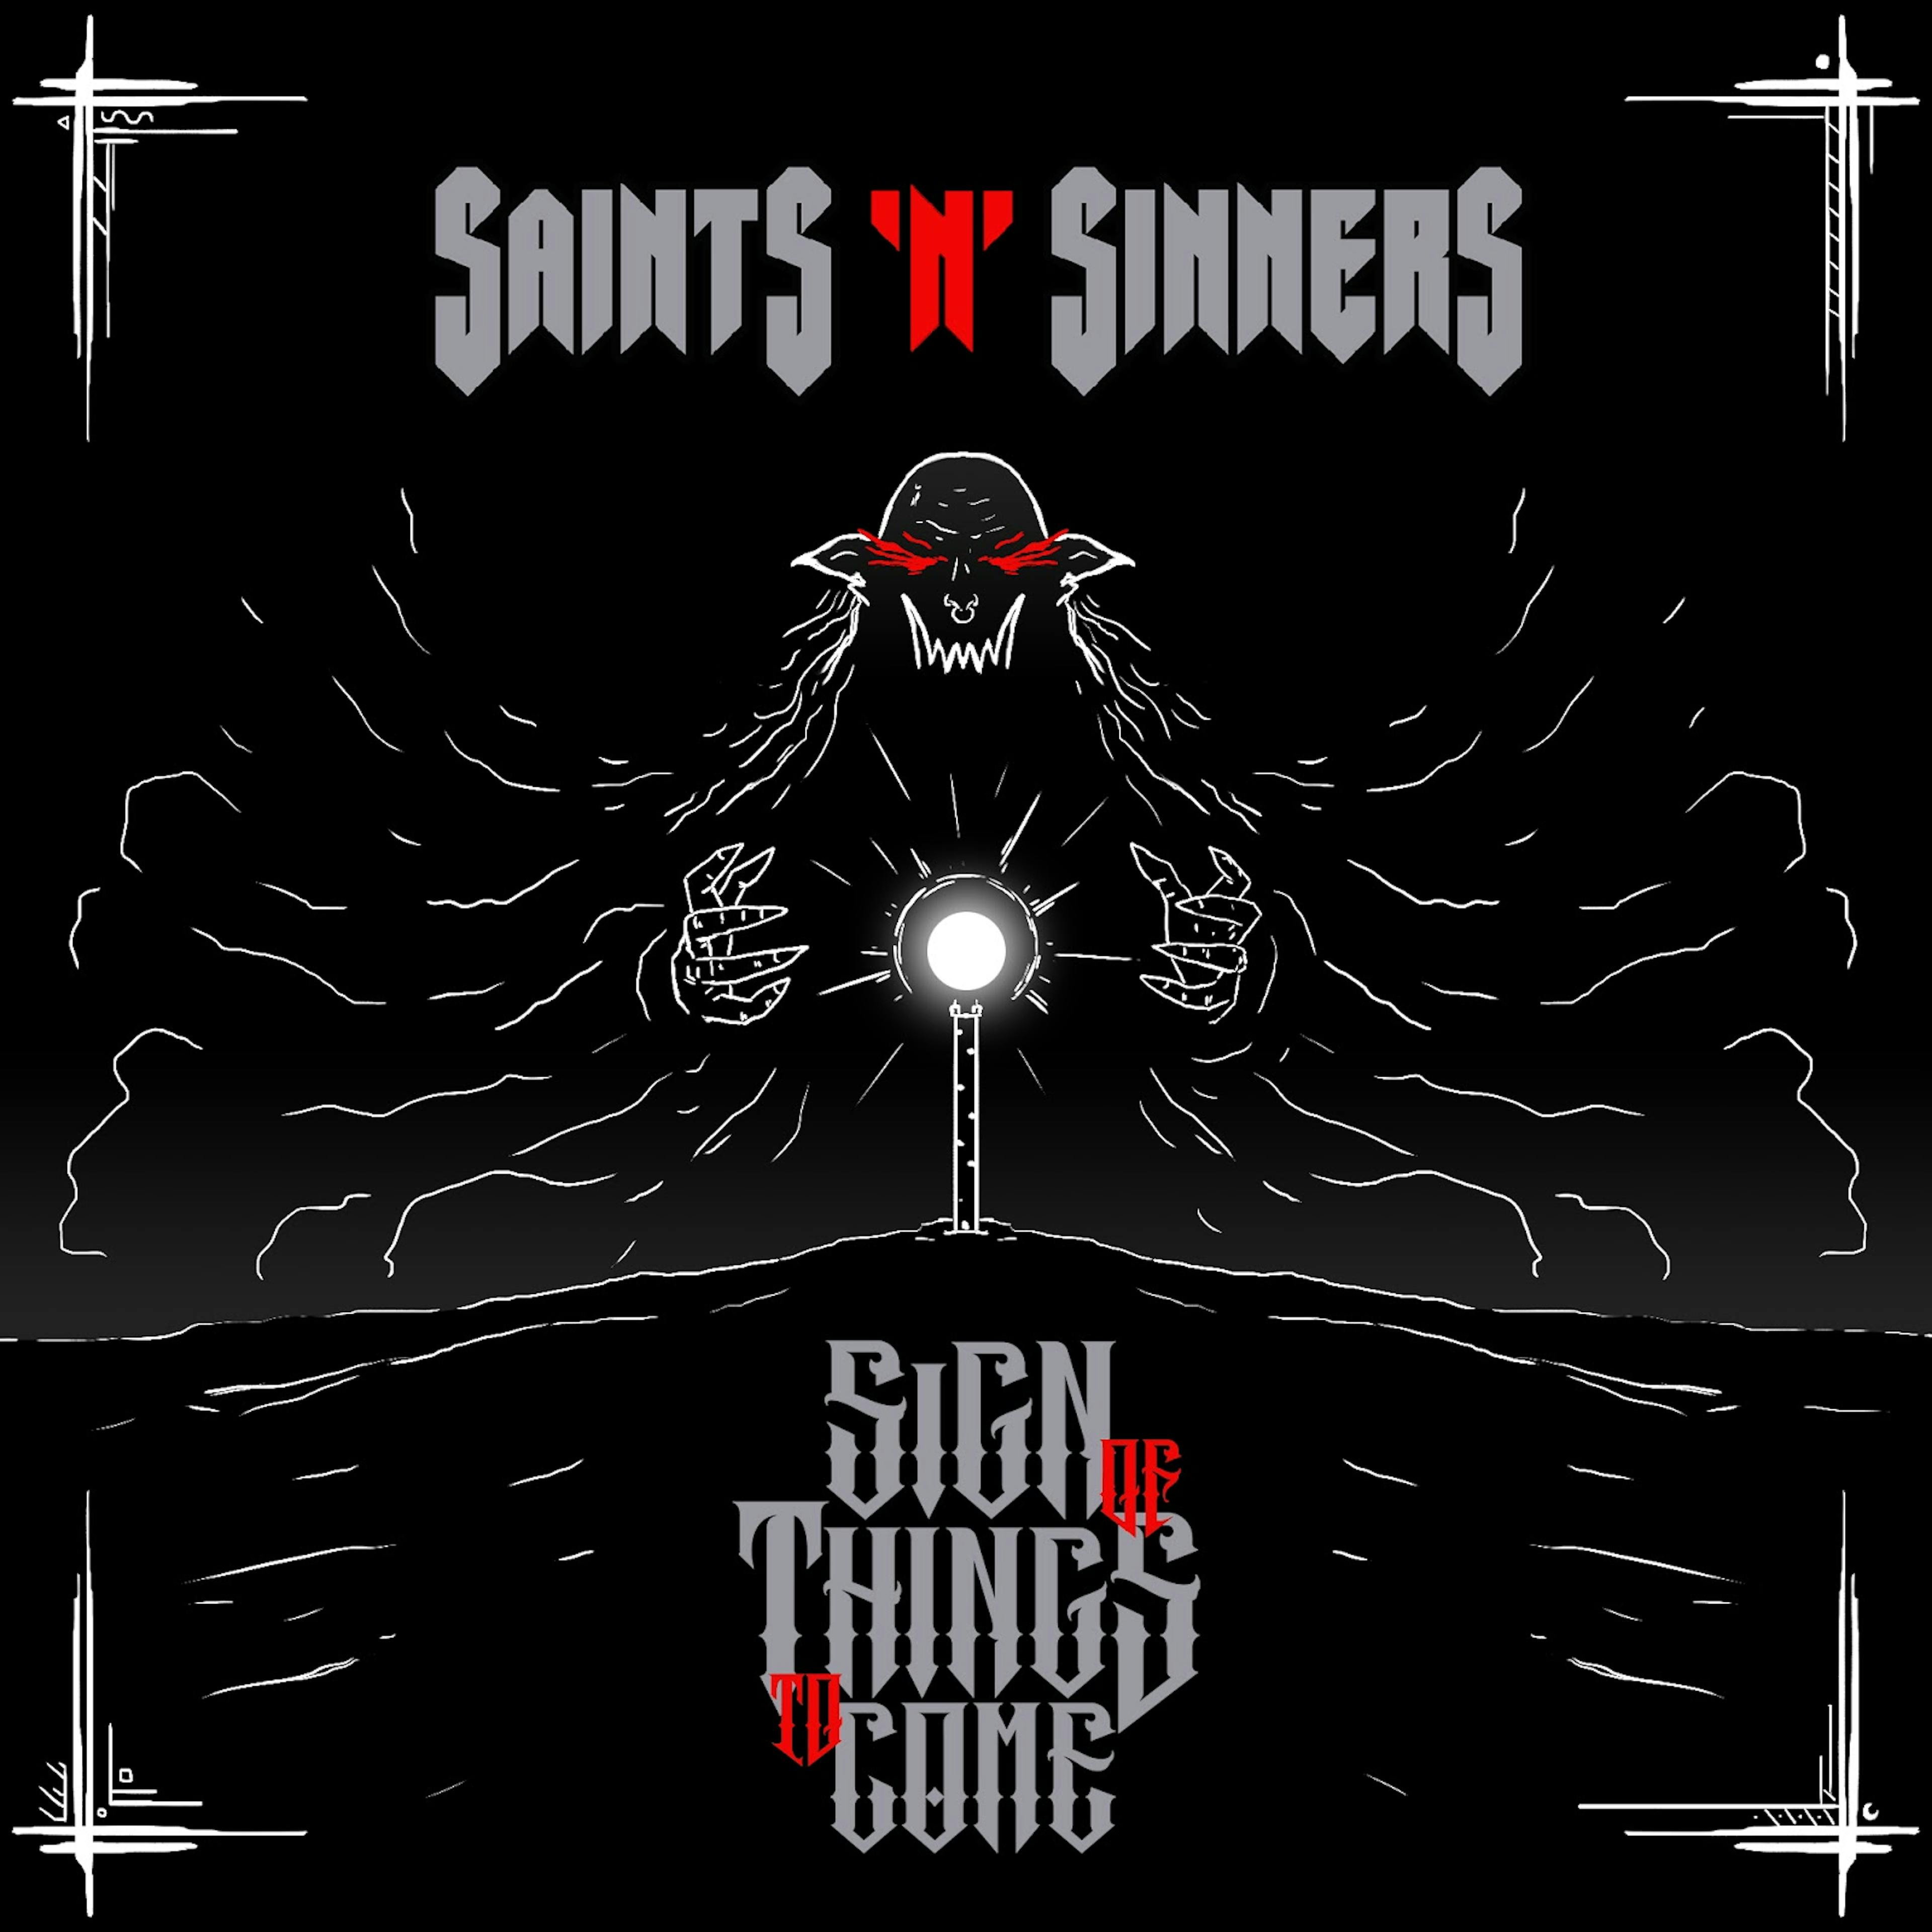 Single cover for Saints 'N' Sinners' Sign of Things to Come. Illustrated by kertburger.